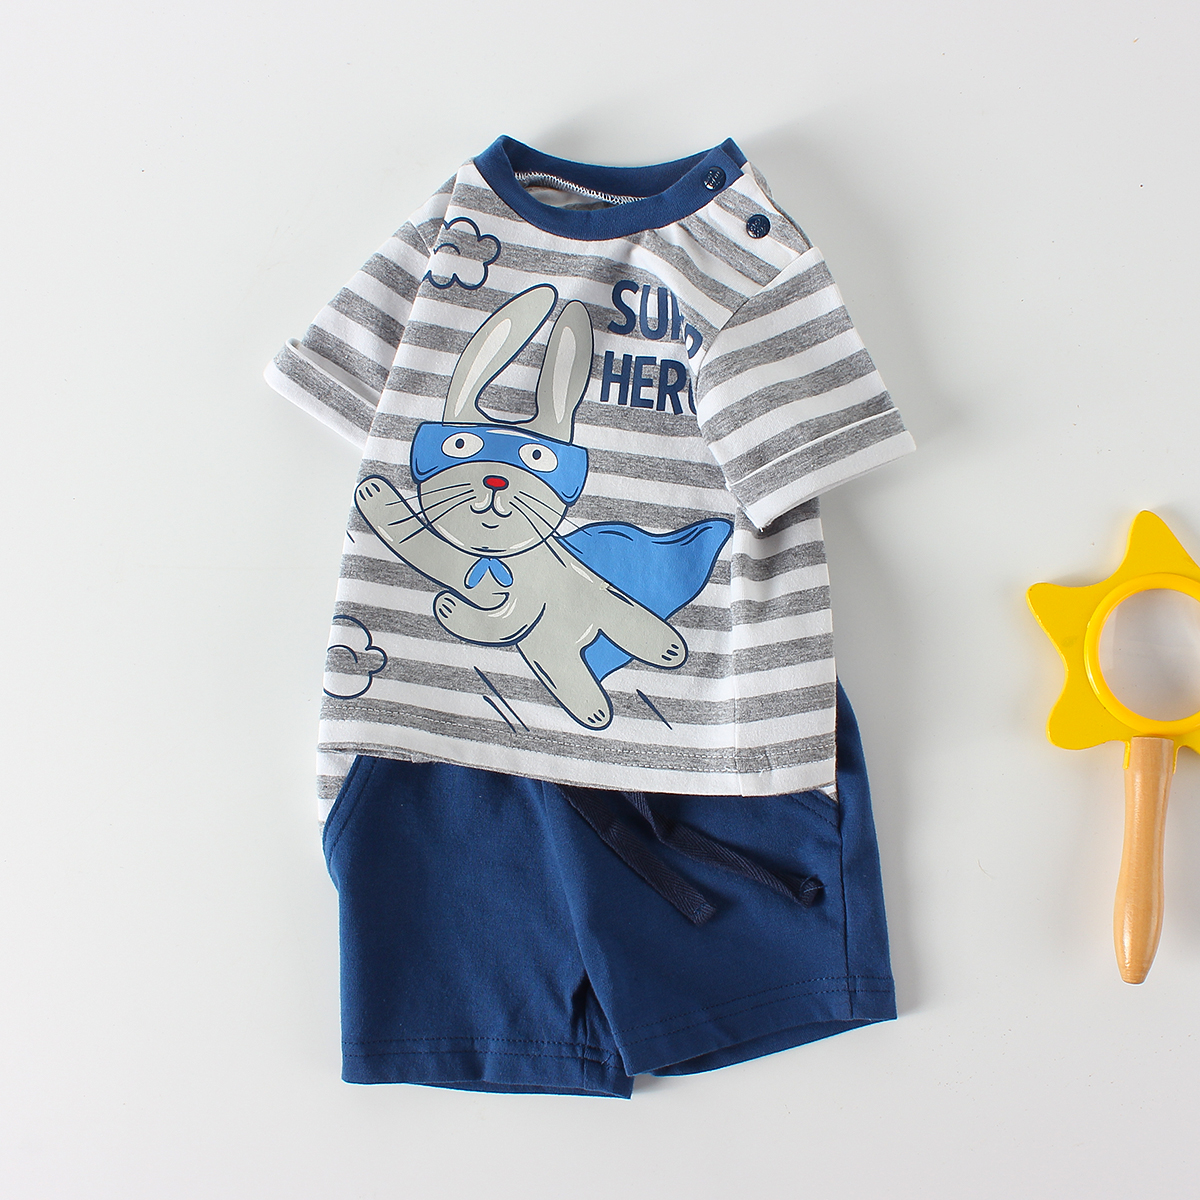 CO 4907 Short Sleeves Soft Baby Clothing Sets